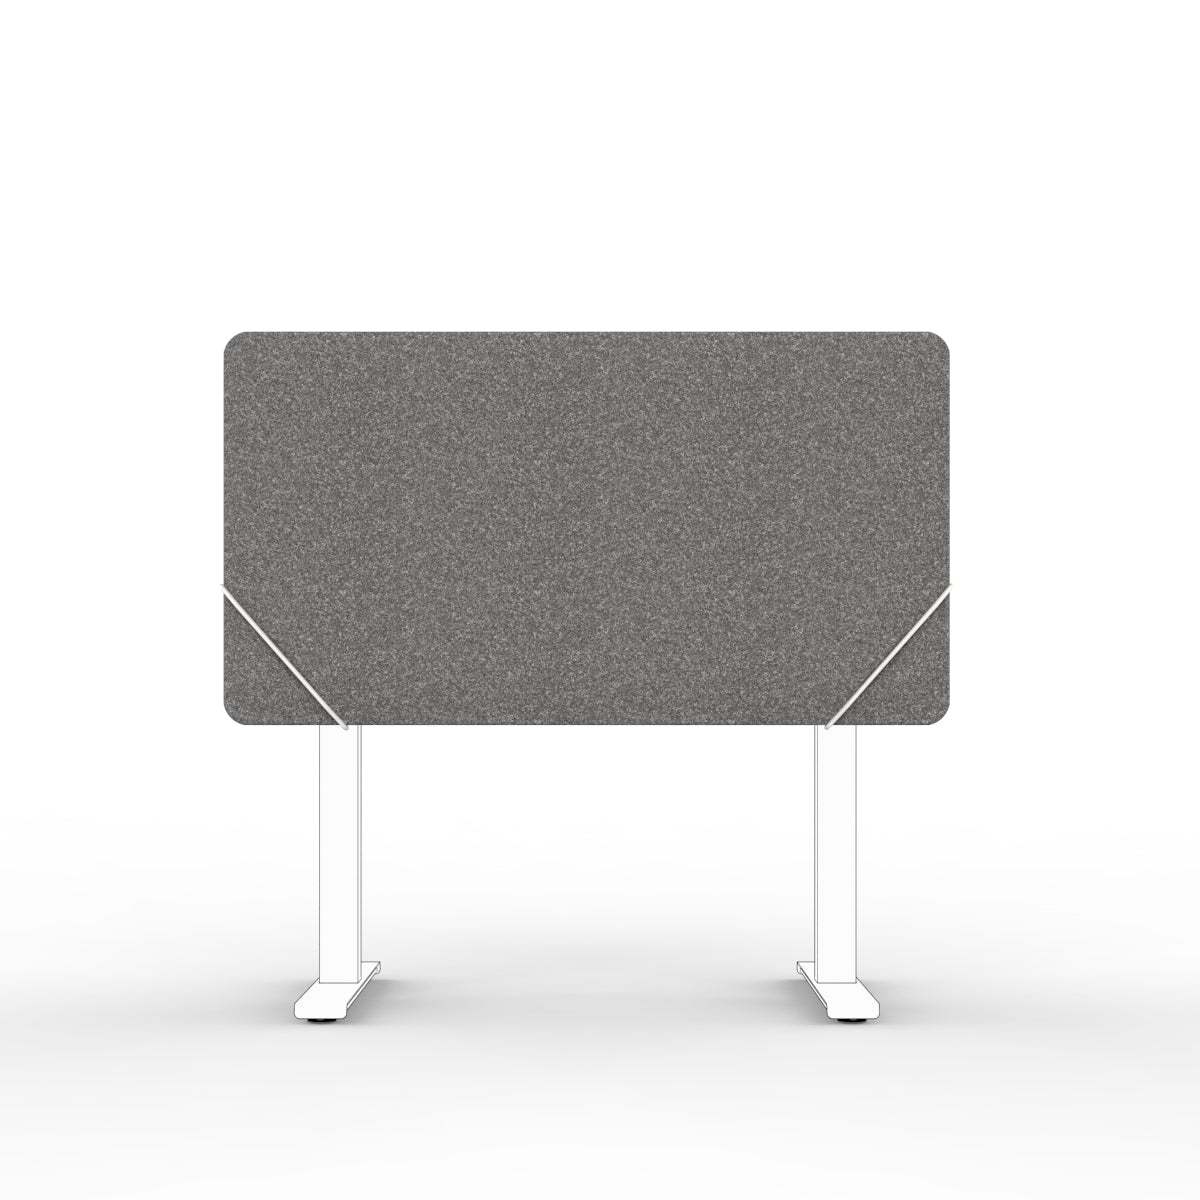 table screen sound absorber in dark grey wool felt with white slide on table mounts. 